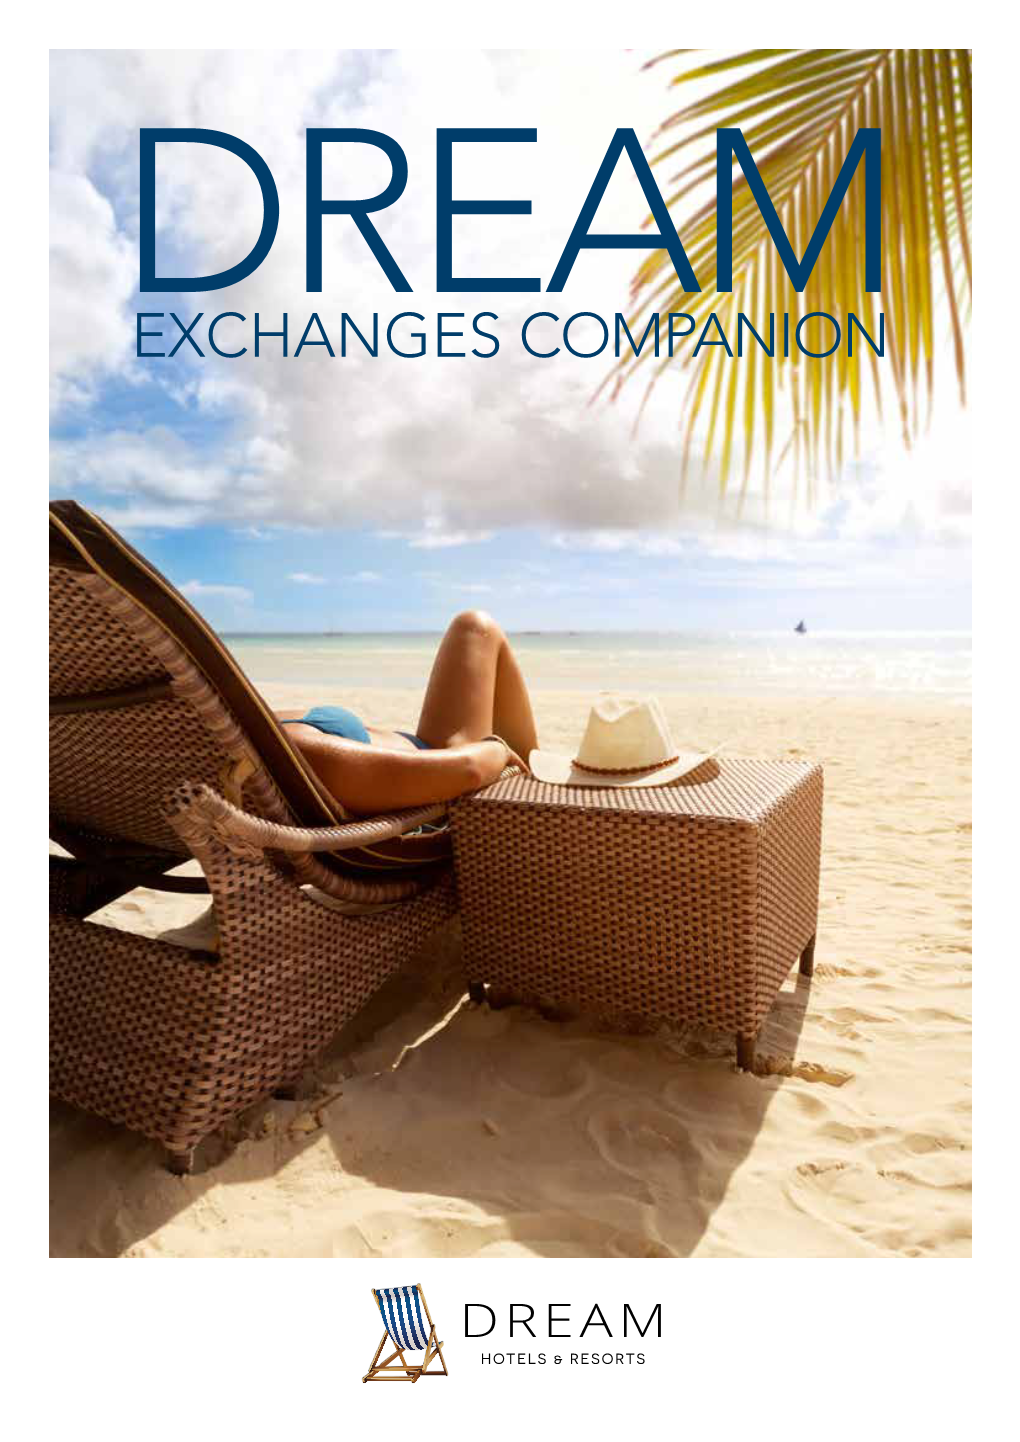 EXCHANGES COMPANION KNOW YOUR COMPANION CONTENTS This Brochure Has Been Designed to Make Choosing Your Dream Holiday a Little Bit Easier